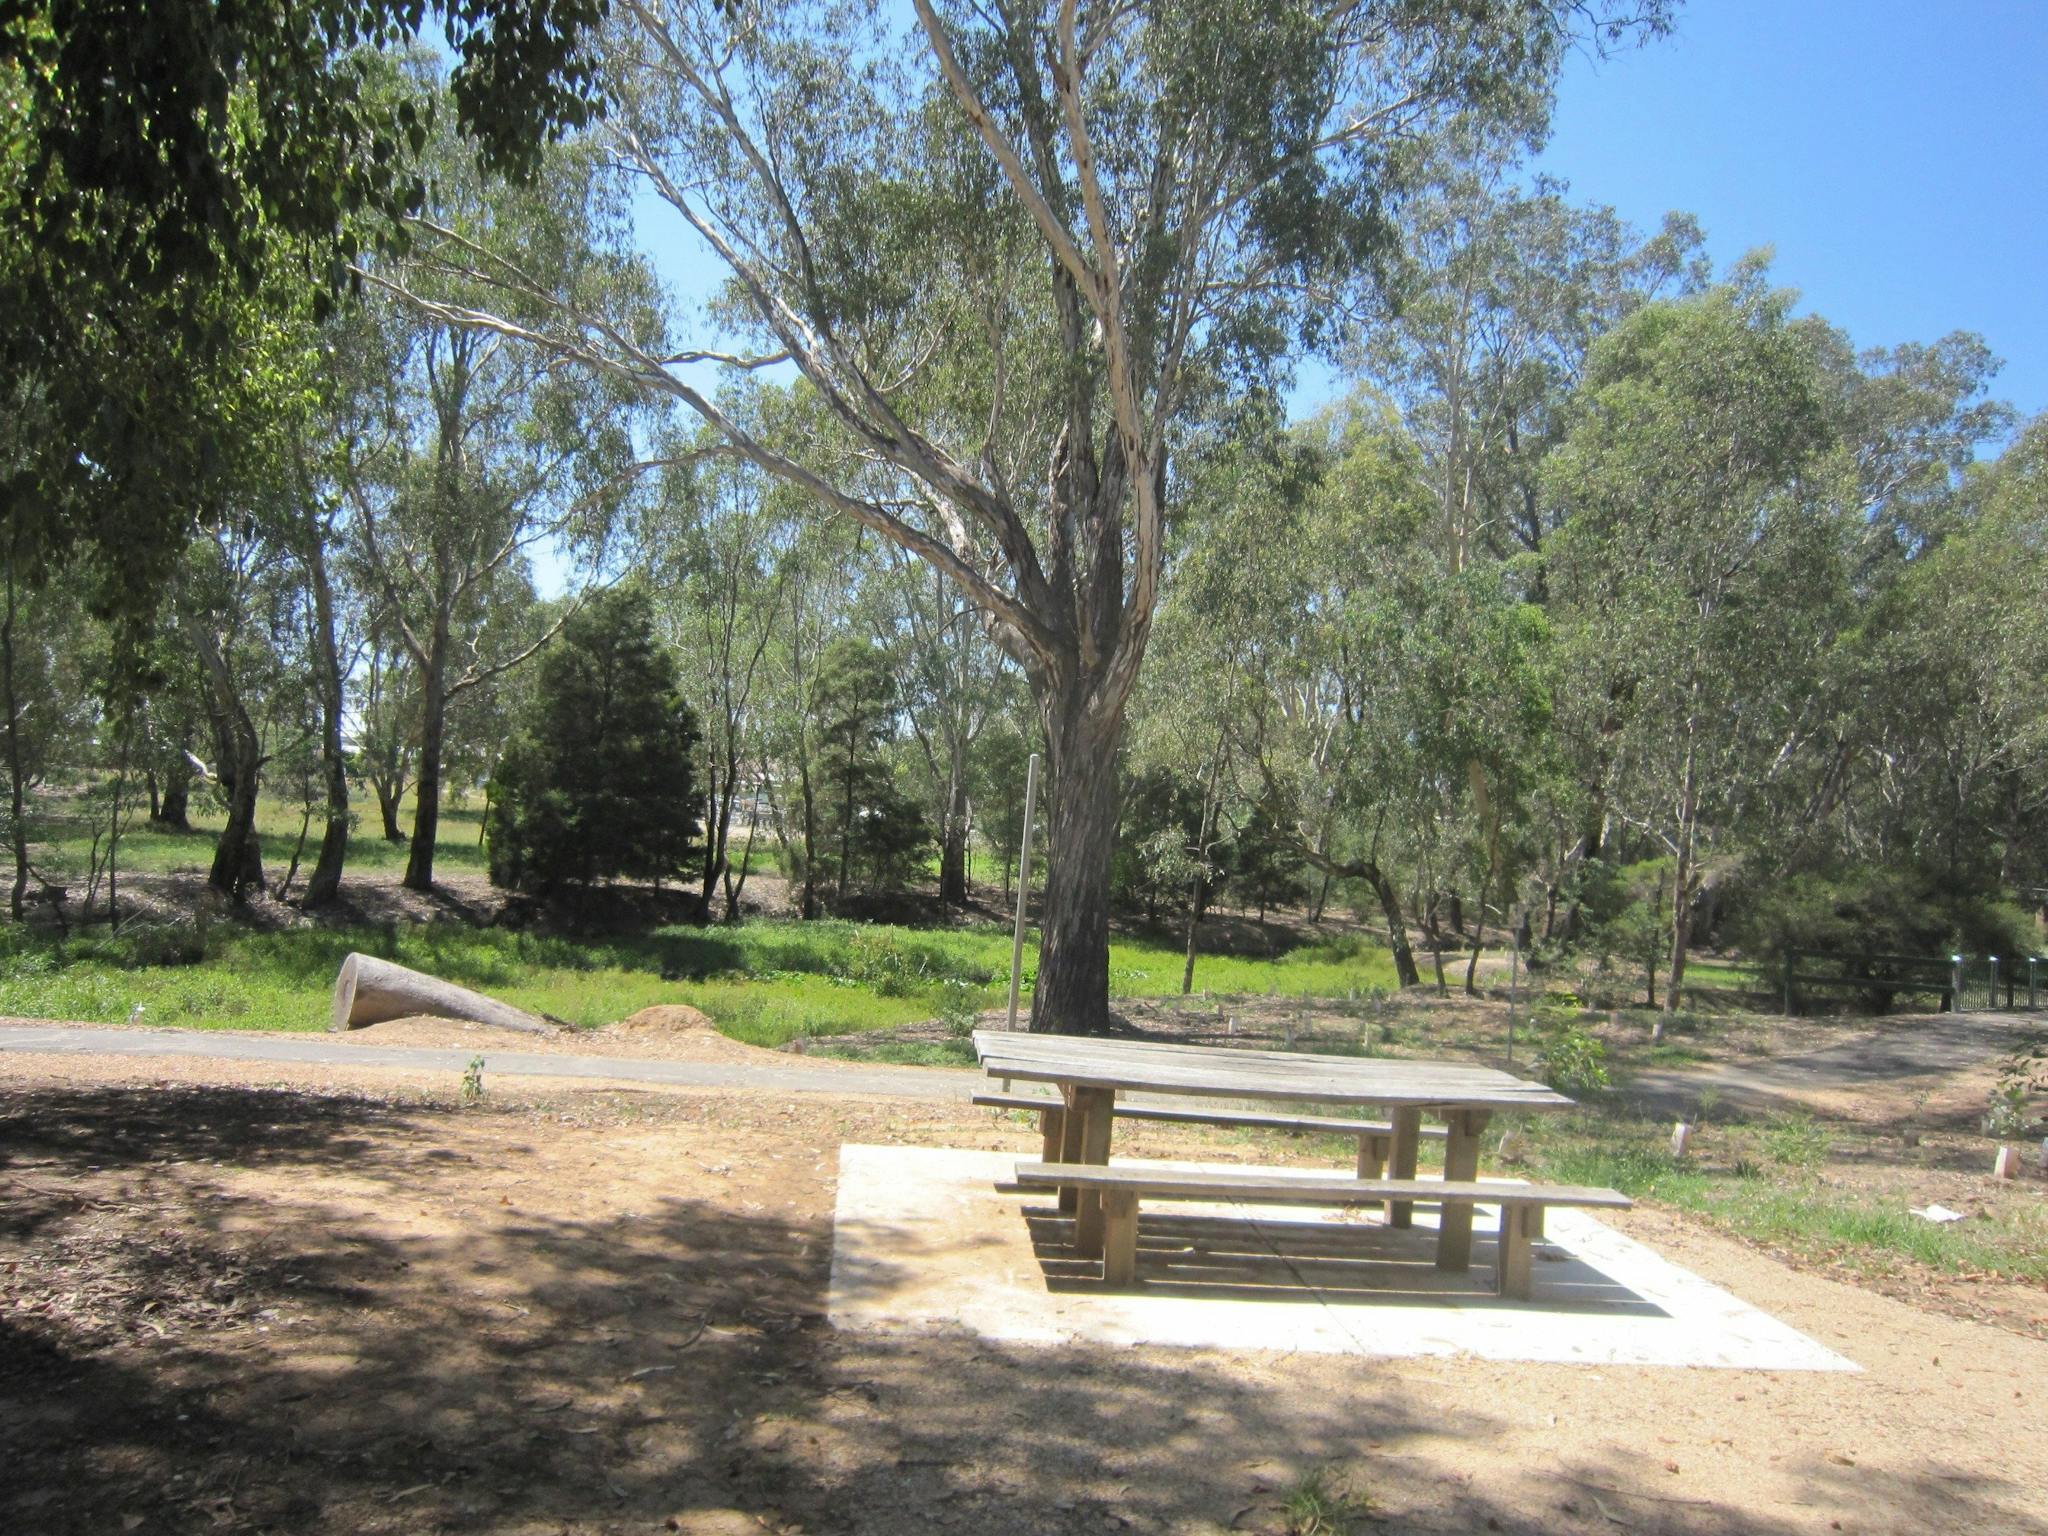 Picnic table, share cycling and walking track, trees, grass, wetland is distance